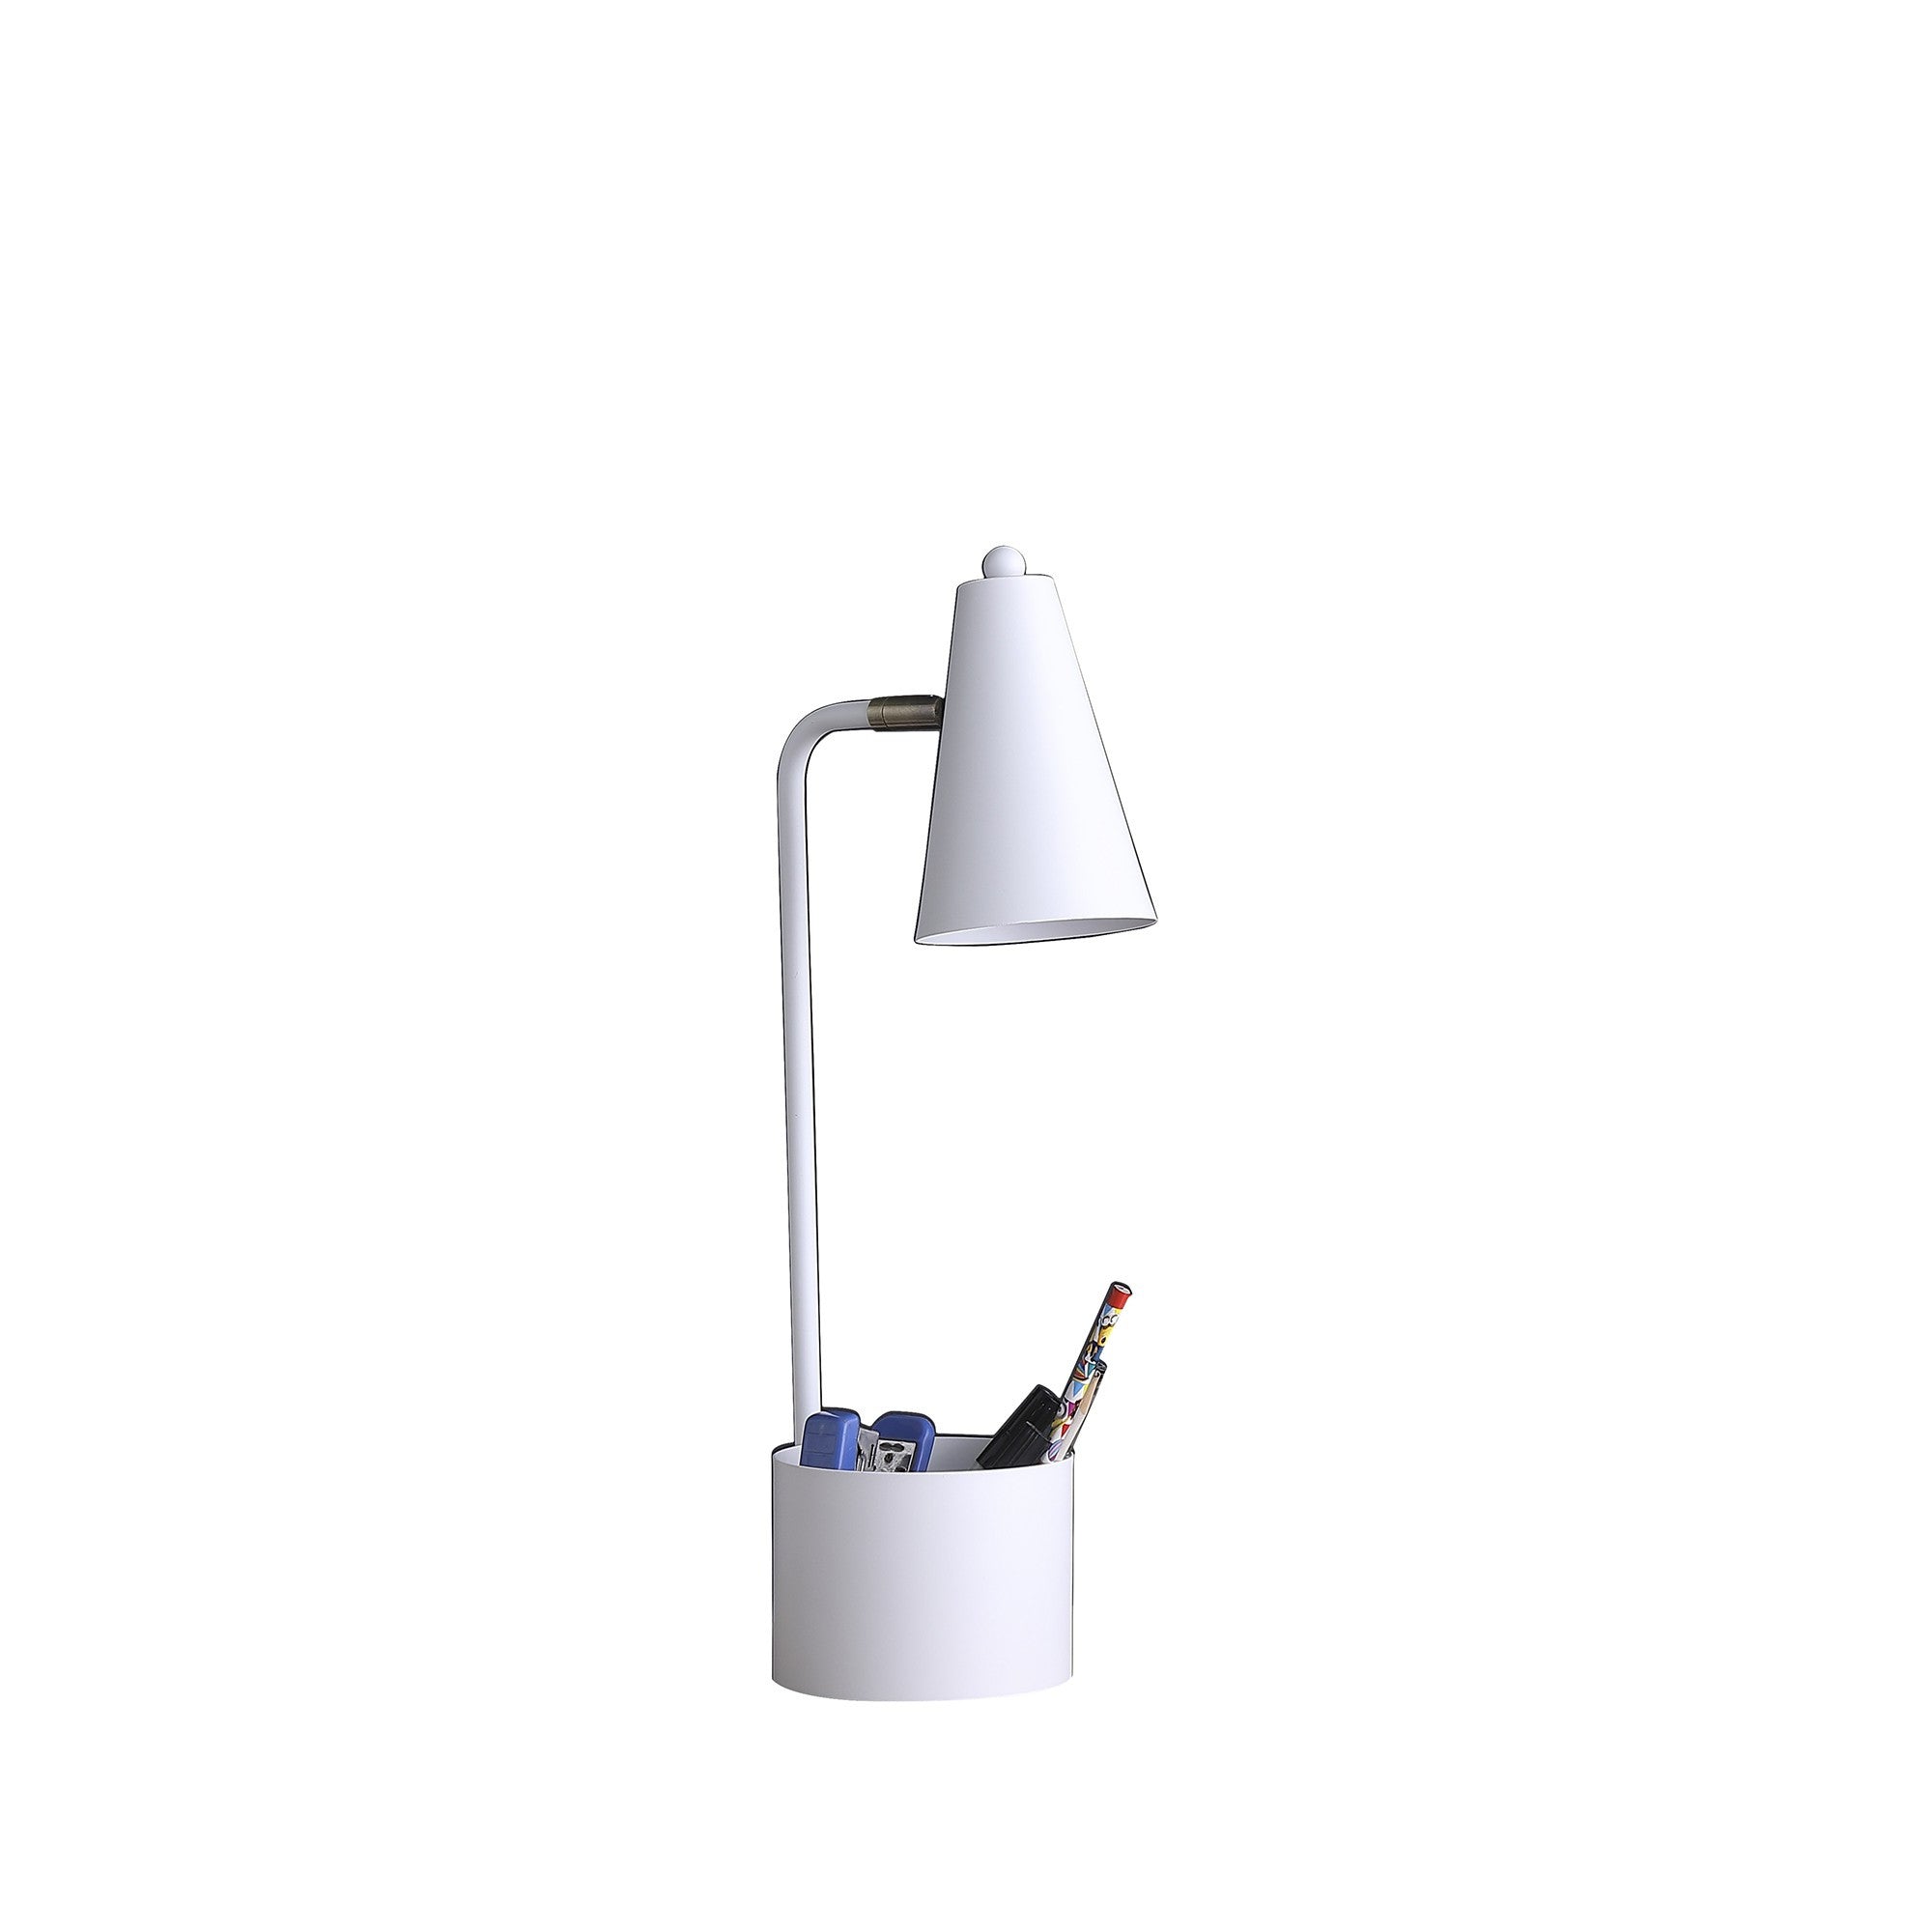 20" Compact White Student Metal Desk Lamp